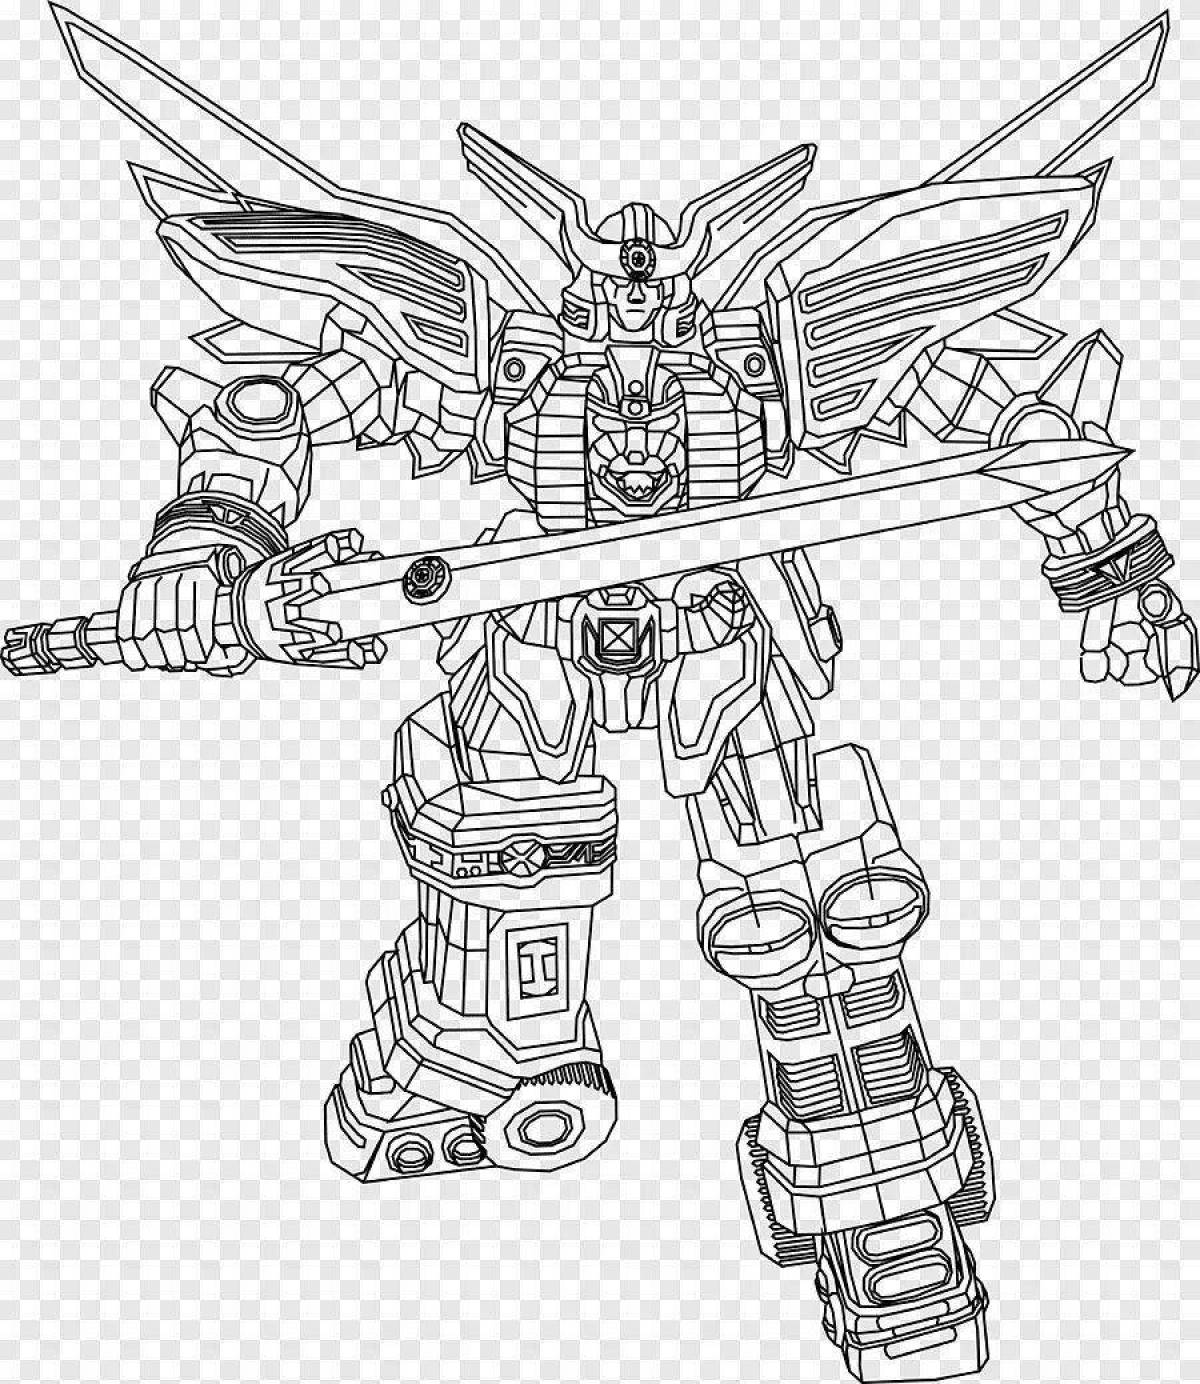 Outstanding robot coloring page for boys